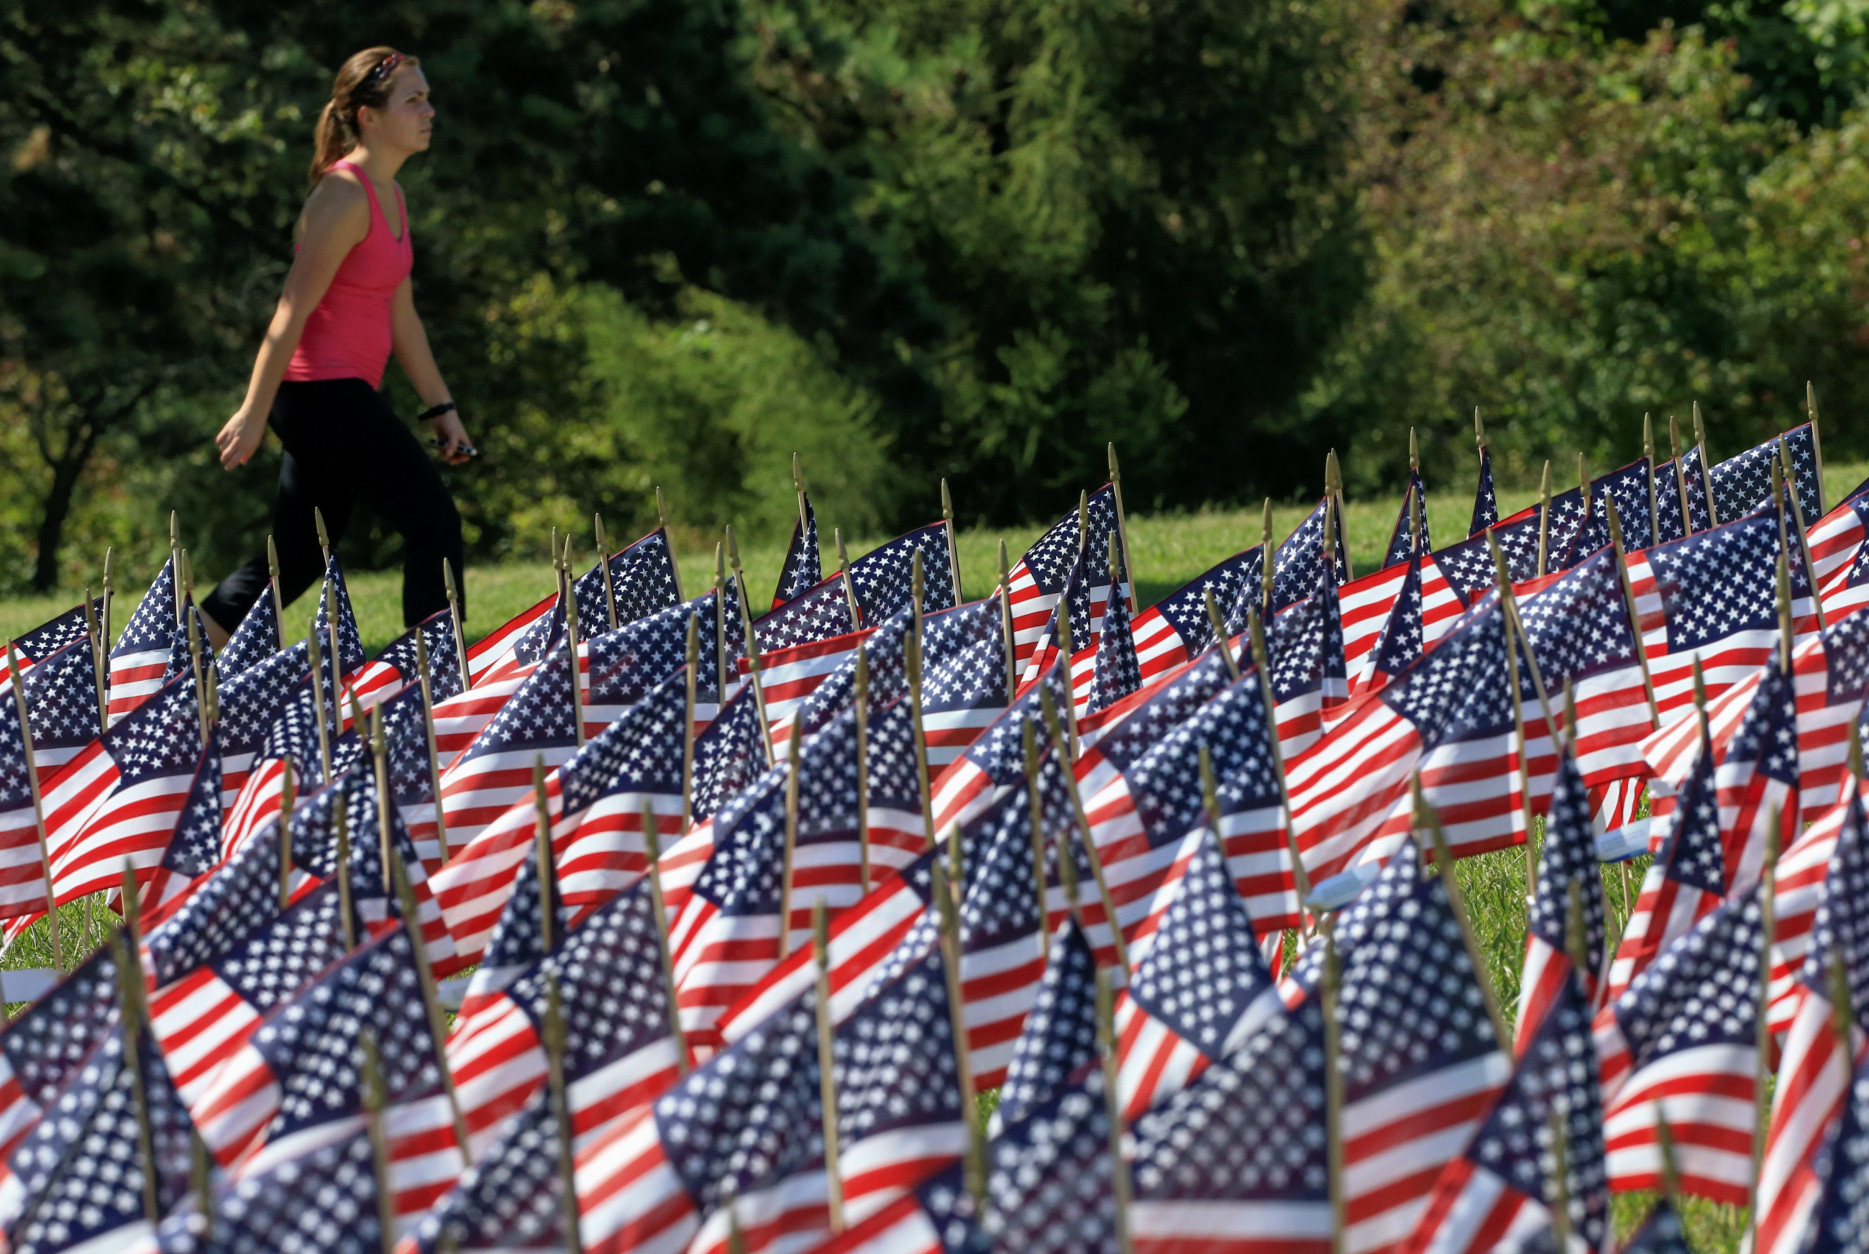 A pedestrian walks Thursday, Sept. 10, 2015, past flags carrying the names of the victims of the Sept. 11 attacks in Omaha, Neb. The flags were placed at Memorial Park as a tribute to the fallen. (AP Photo/Nati Harnik)